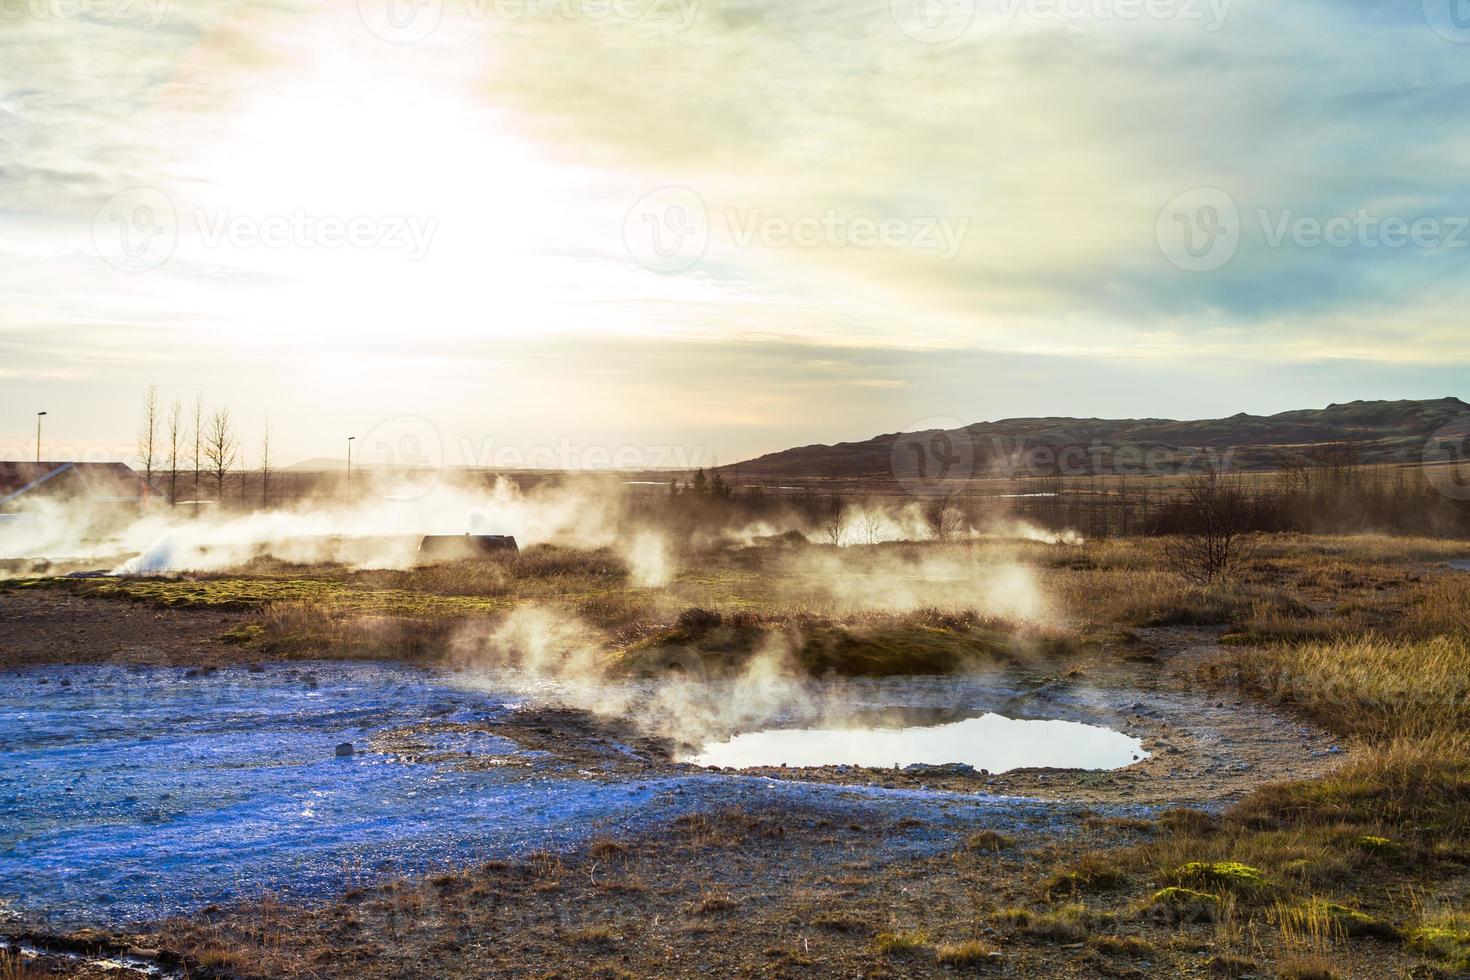 Strokkur, one of the most famous geysers located in a geothermal area beside the Hvita River in the southwest part of Iceland, erupting once every 6-10 minutes photo